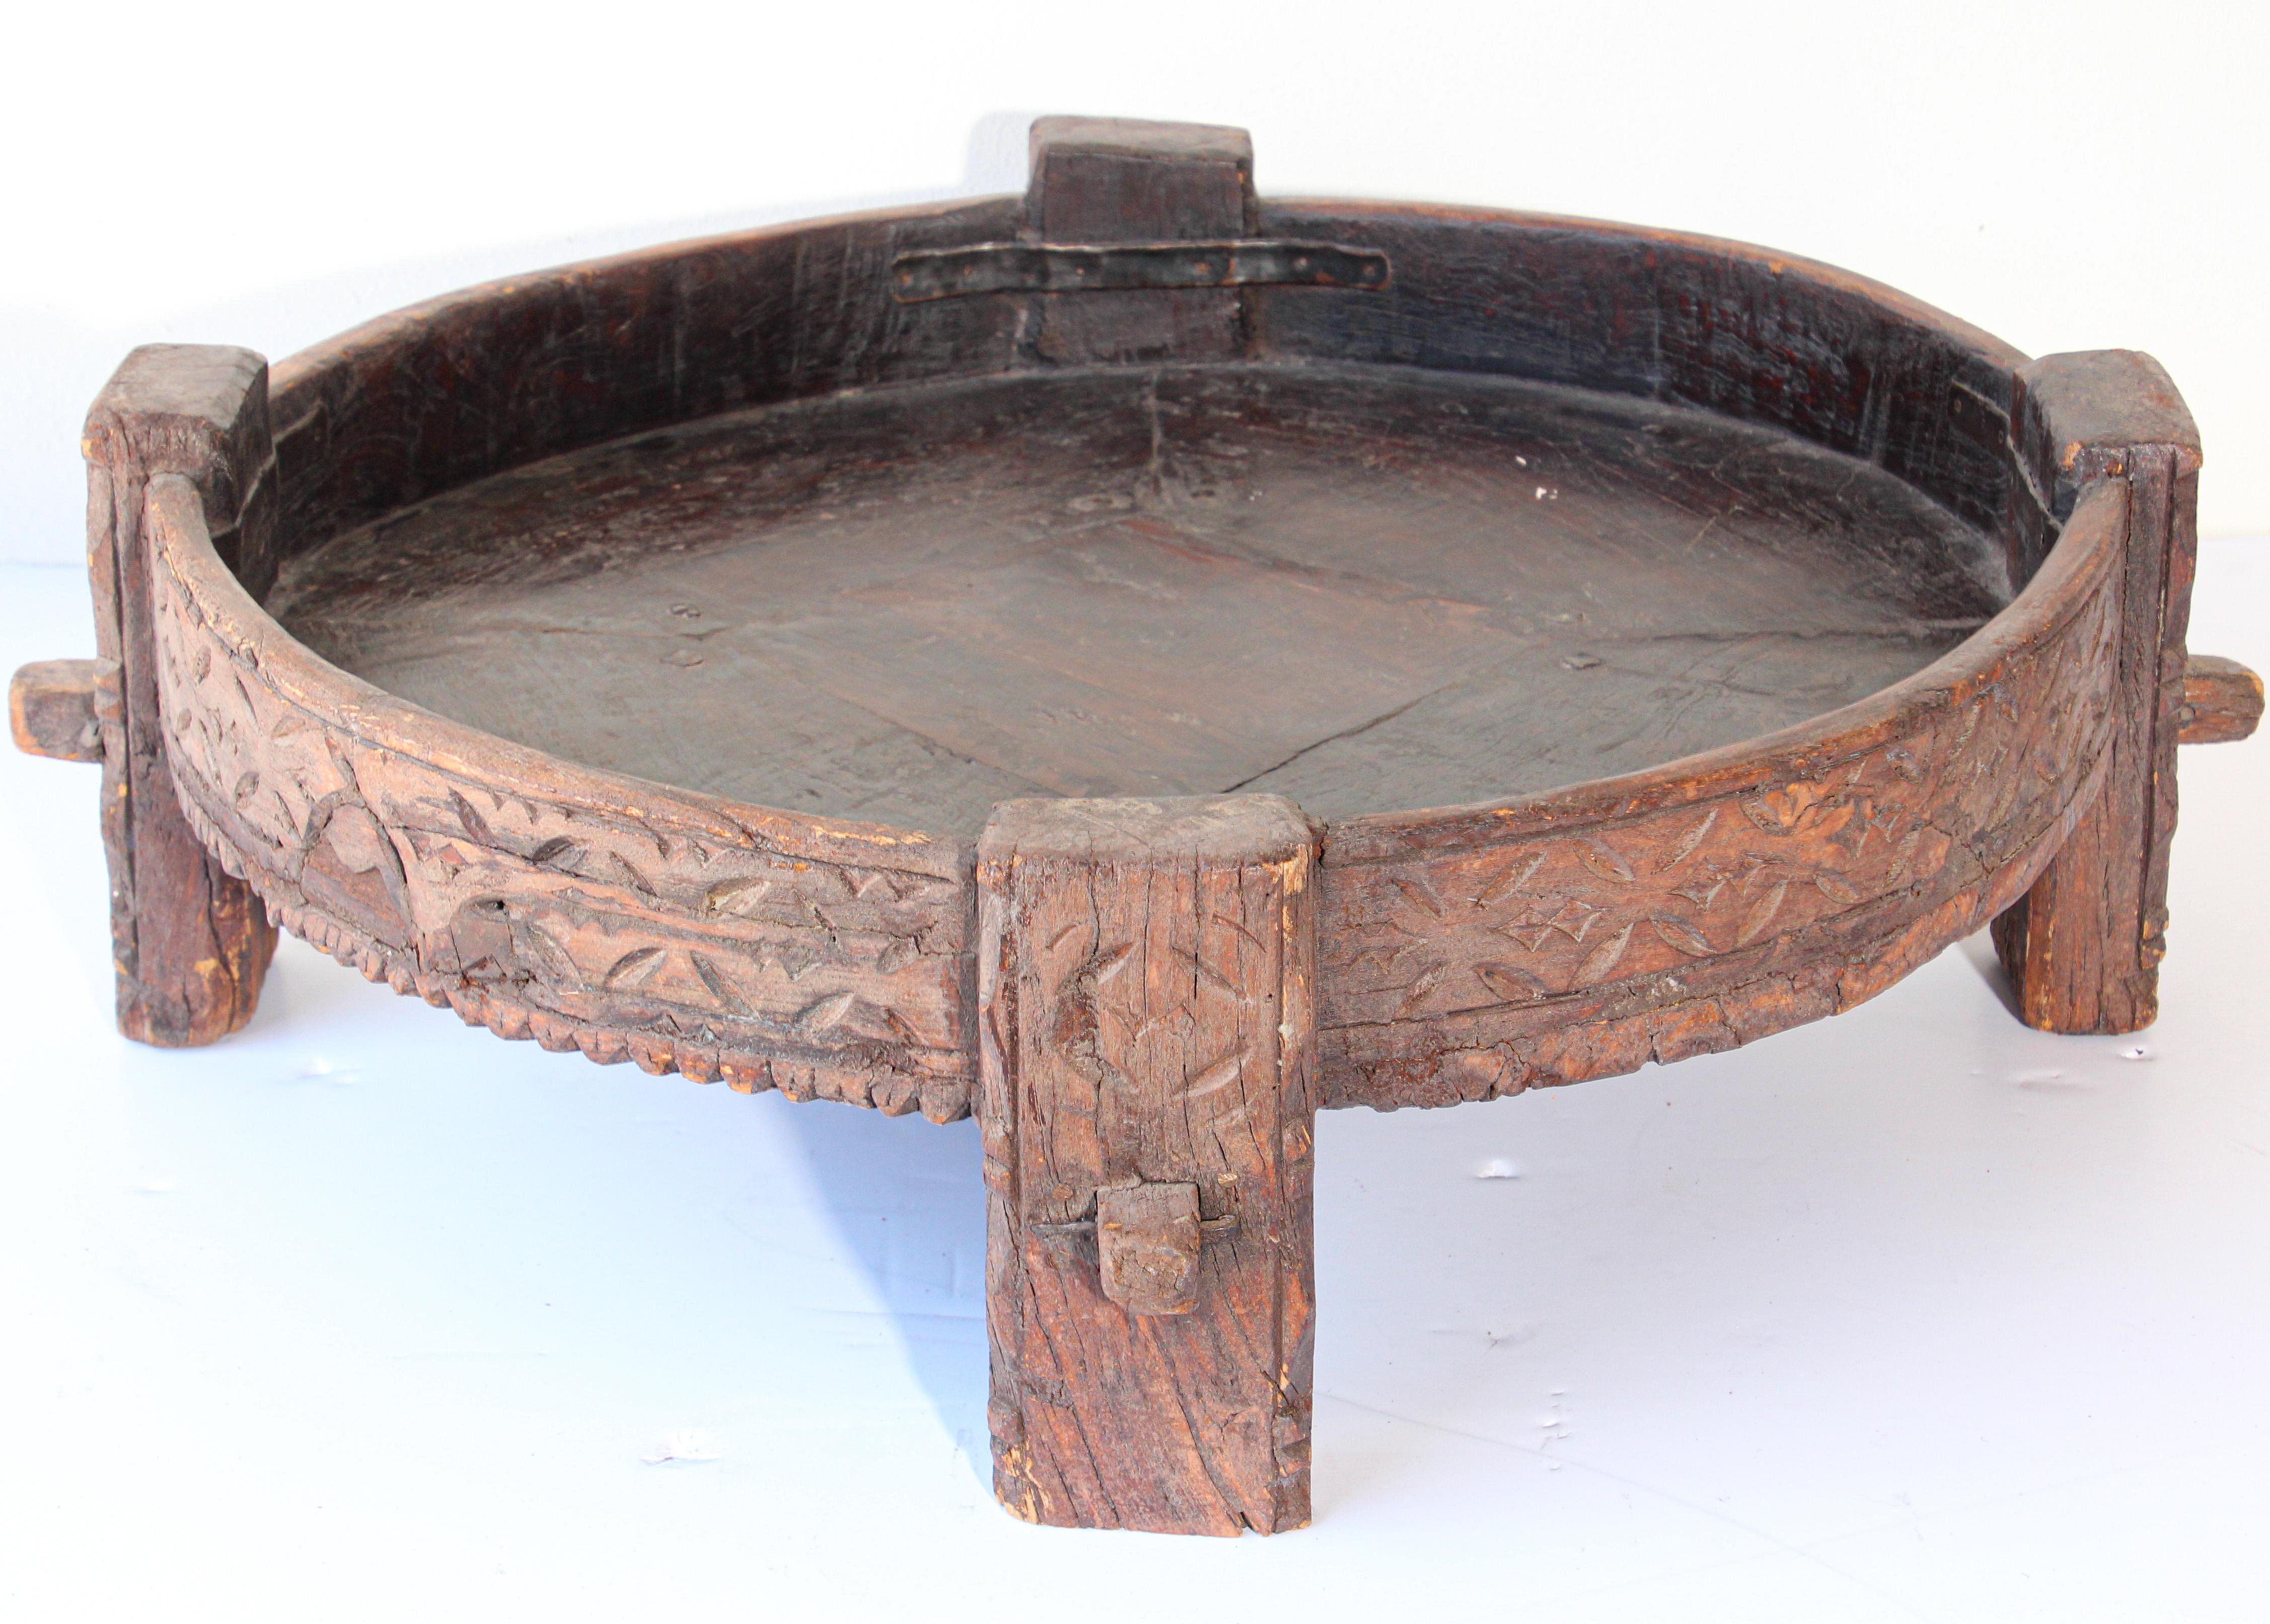 Large antique hand carved wood Indian grinder tribal teak table.
Walnut color hand carved with geometric tribal design.
Handcrafted of wood and iron, hand carved with geometric ethnic tribal design.
Very sturdy rustic wood table with nice patina,